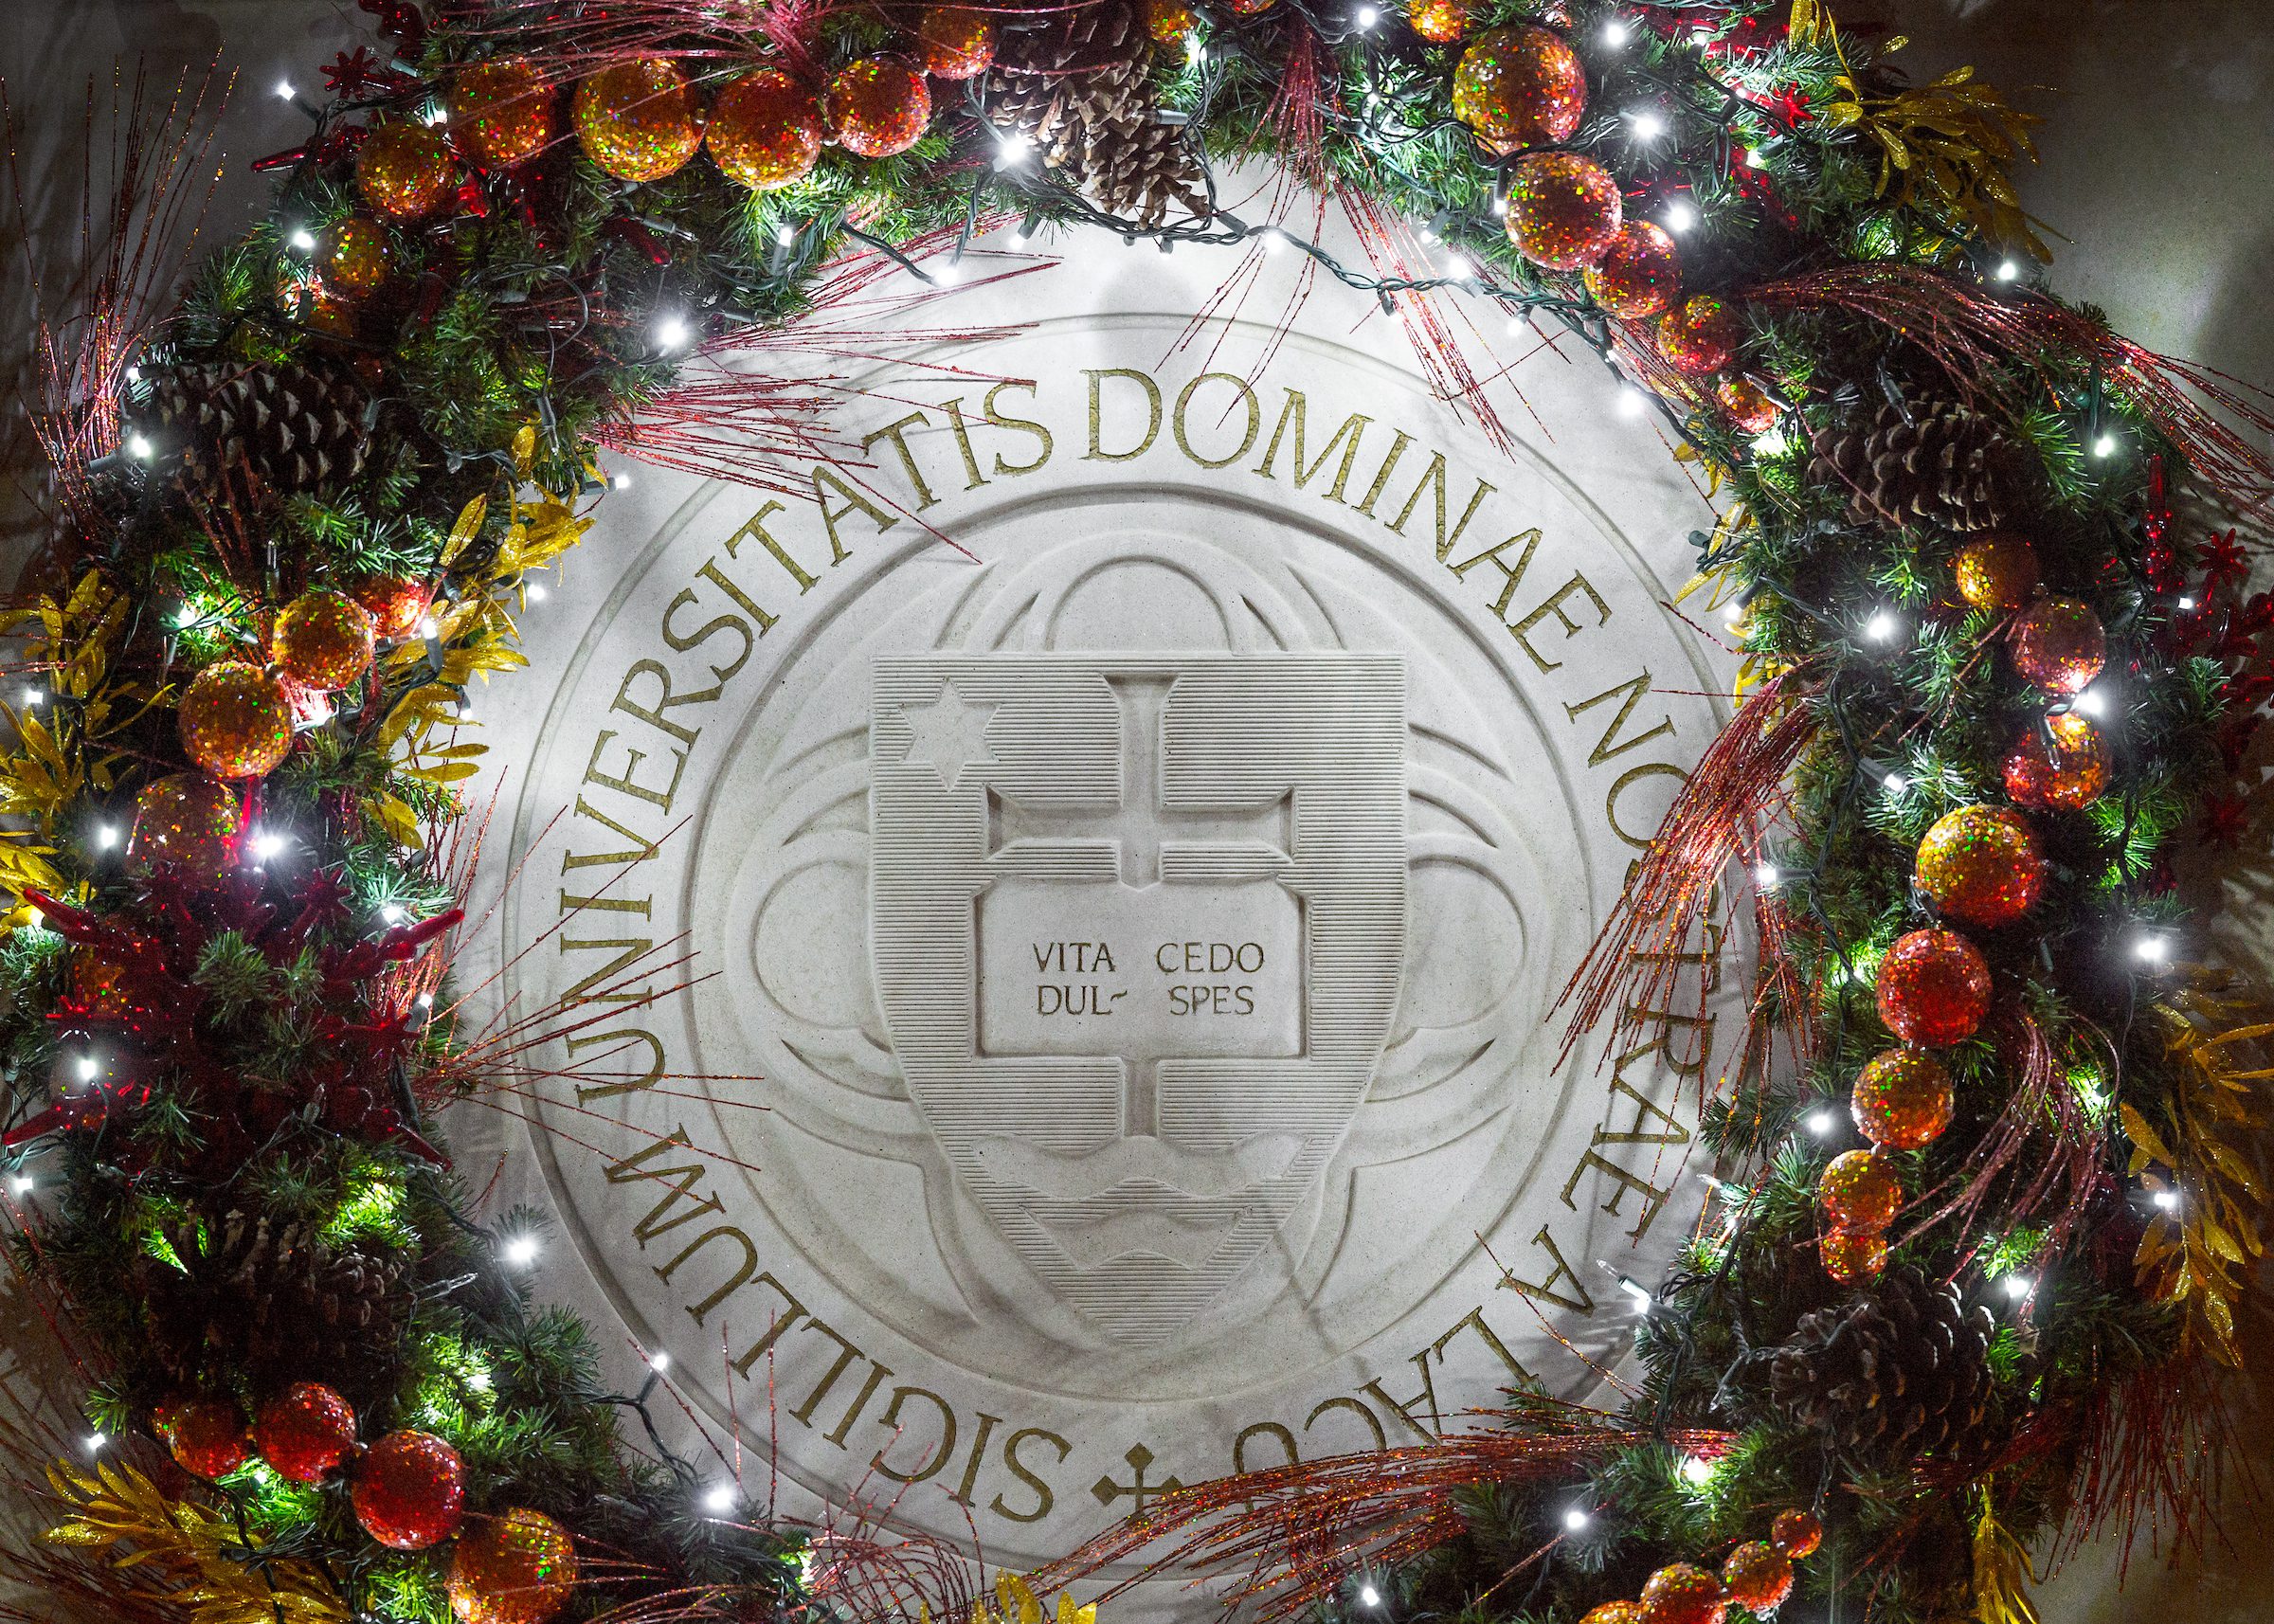 Christmas at Notre Dame: A look back at celebrations through the years